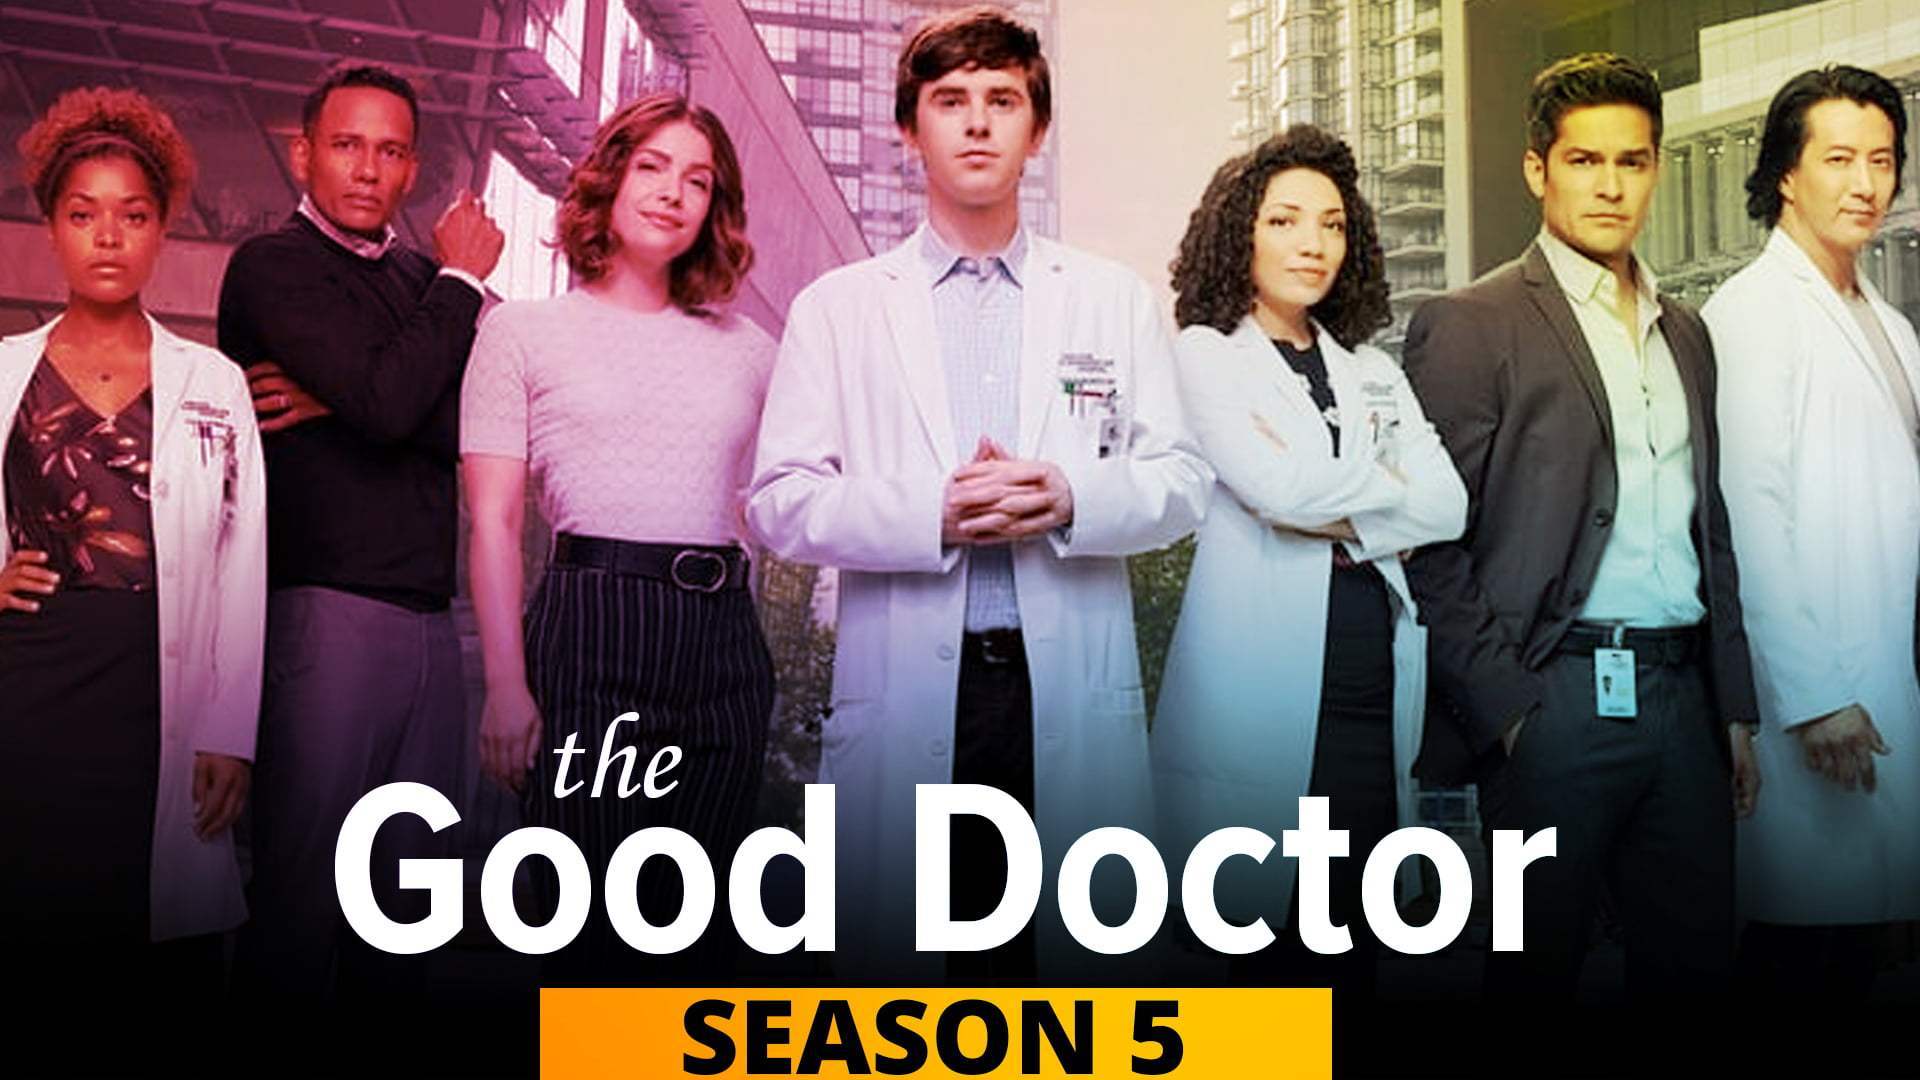 The good doctor cast